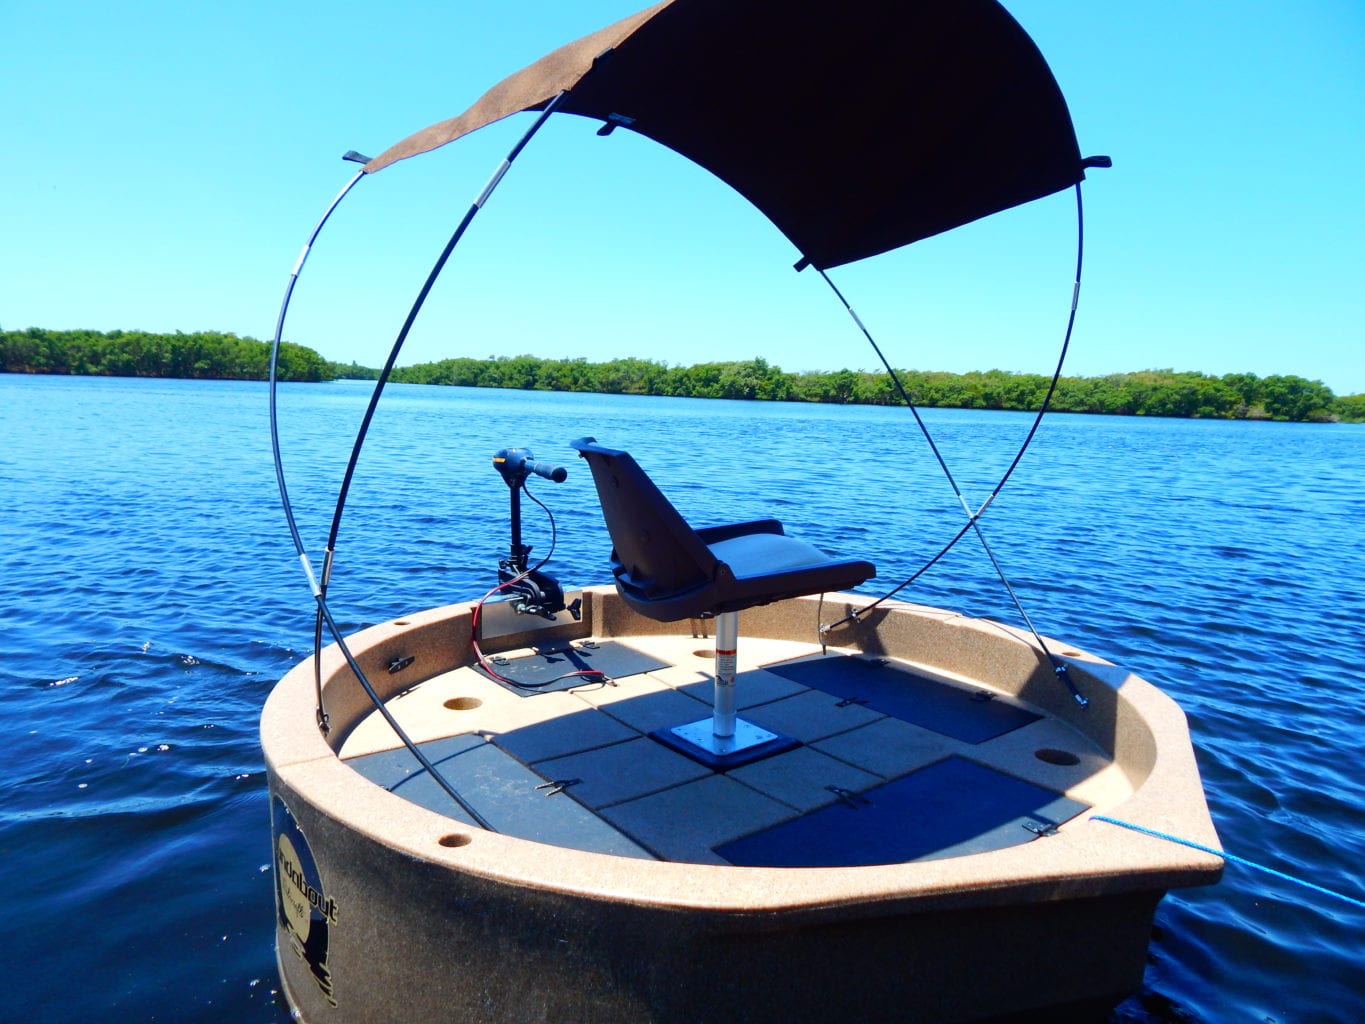 This shows the sunshade installed on a tan colored round boat